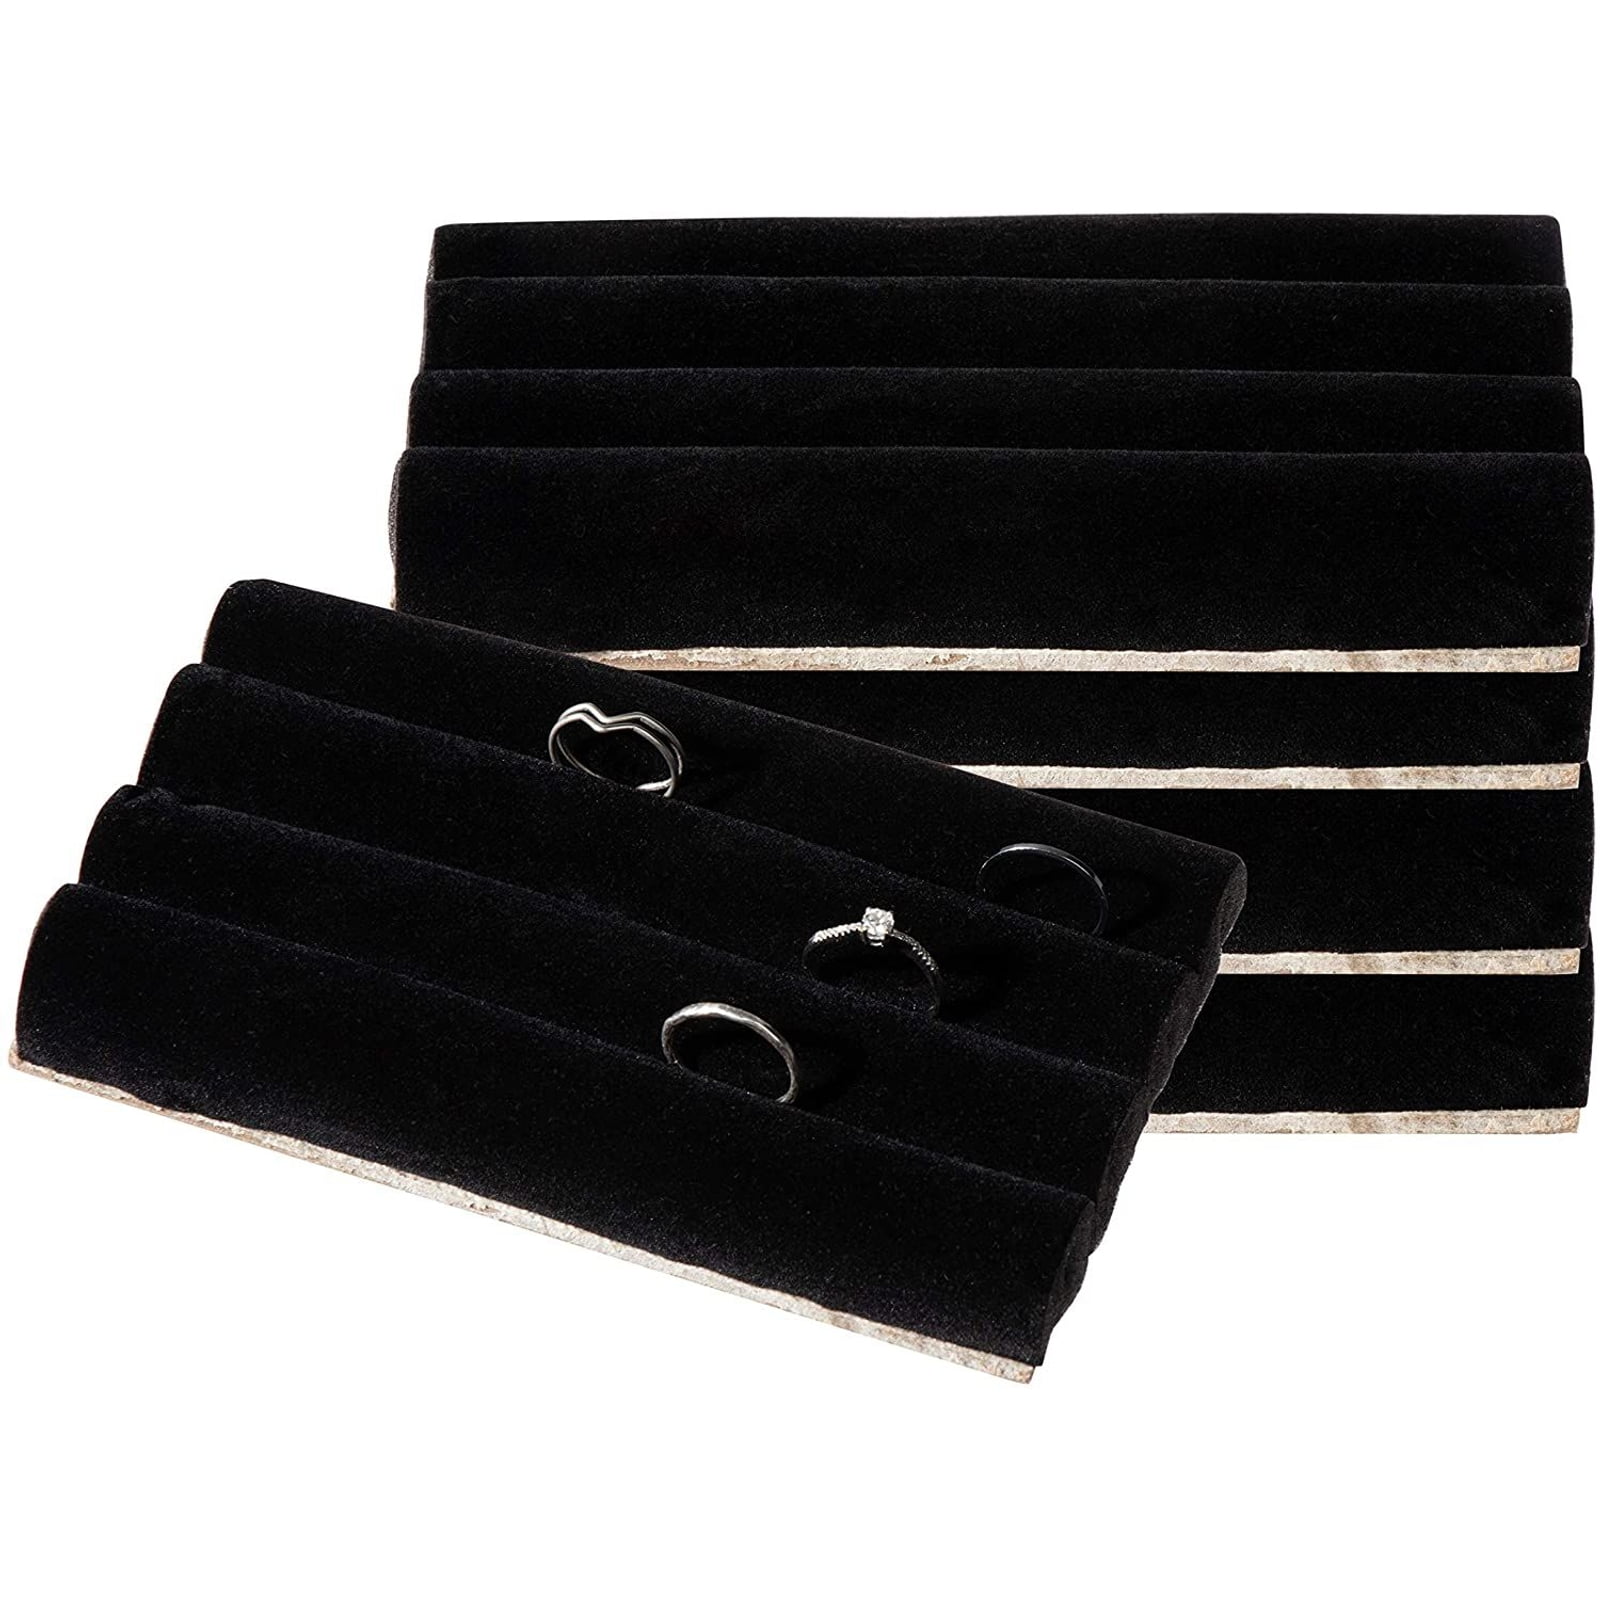 2 Pads & 6 Black 72 Ring Pads Jewelry Travel Case With 8 Pcs  1.5" Black Trays 